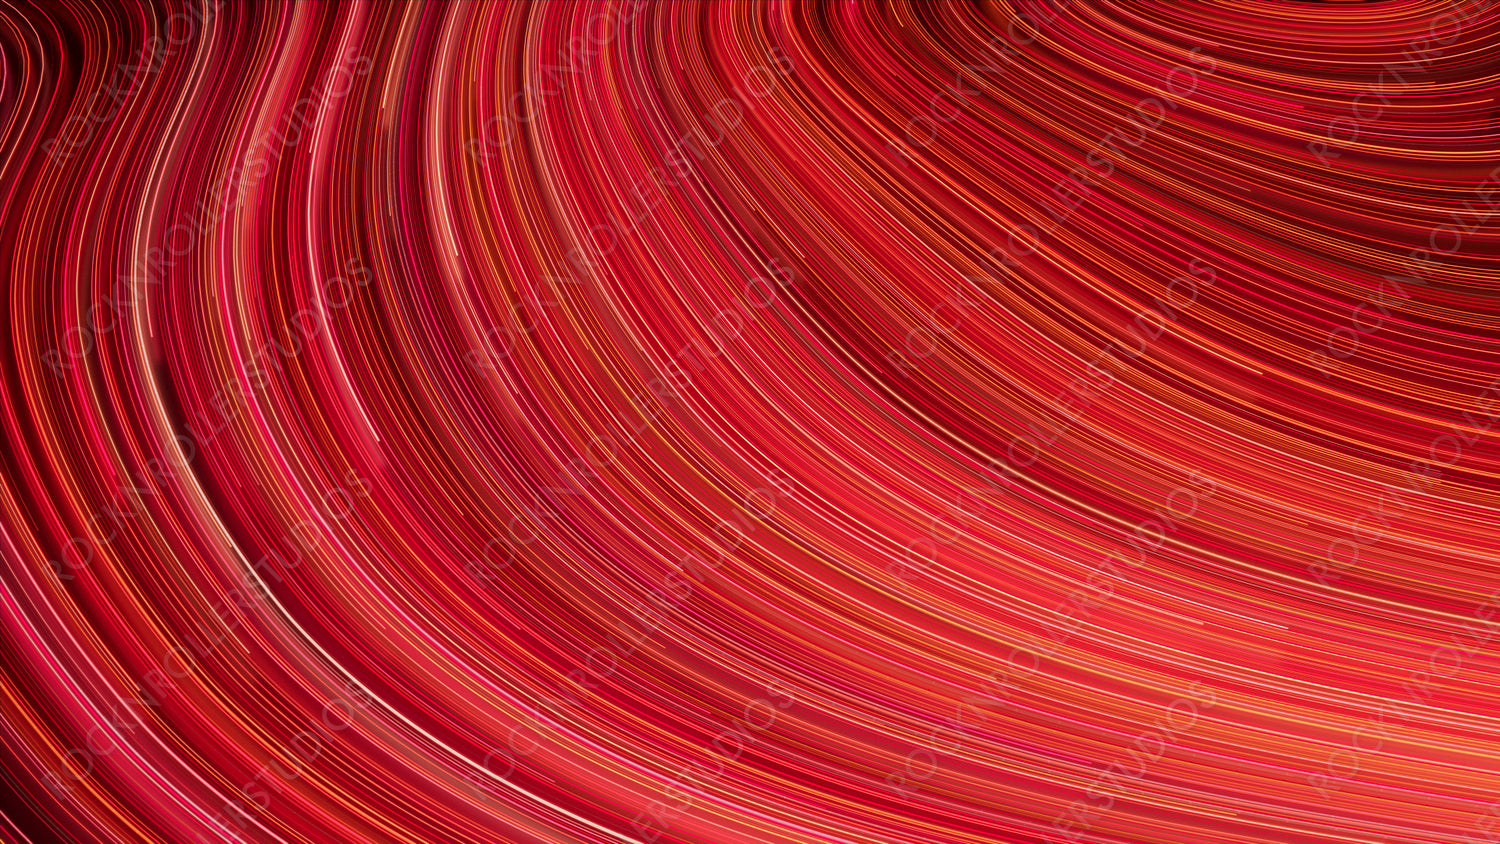 Red, Orange and White Colored Streaks form Wavy Swoosh Background. 3D Render.